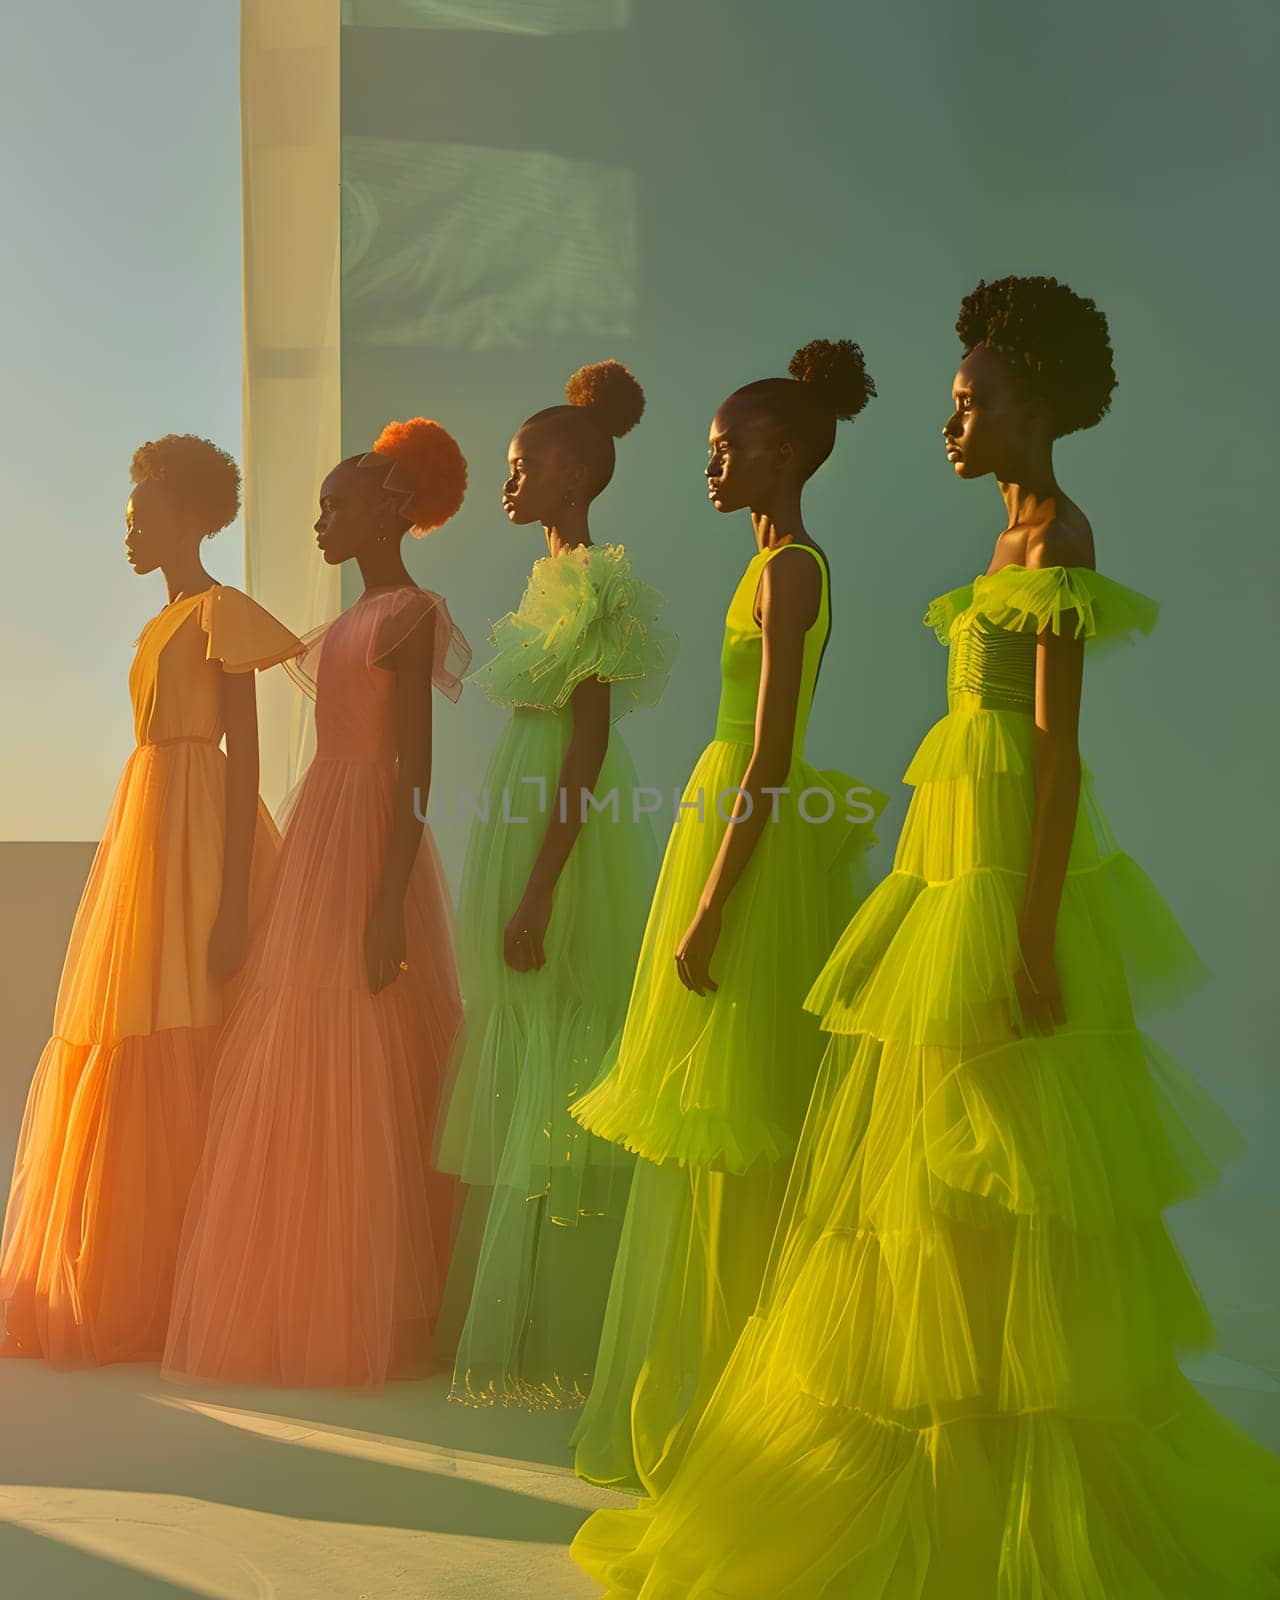 Women in colorful onepiece dresses stand together showcasing fashion design by Nadtochiy